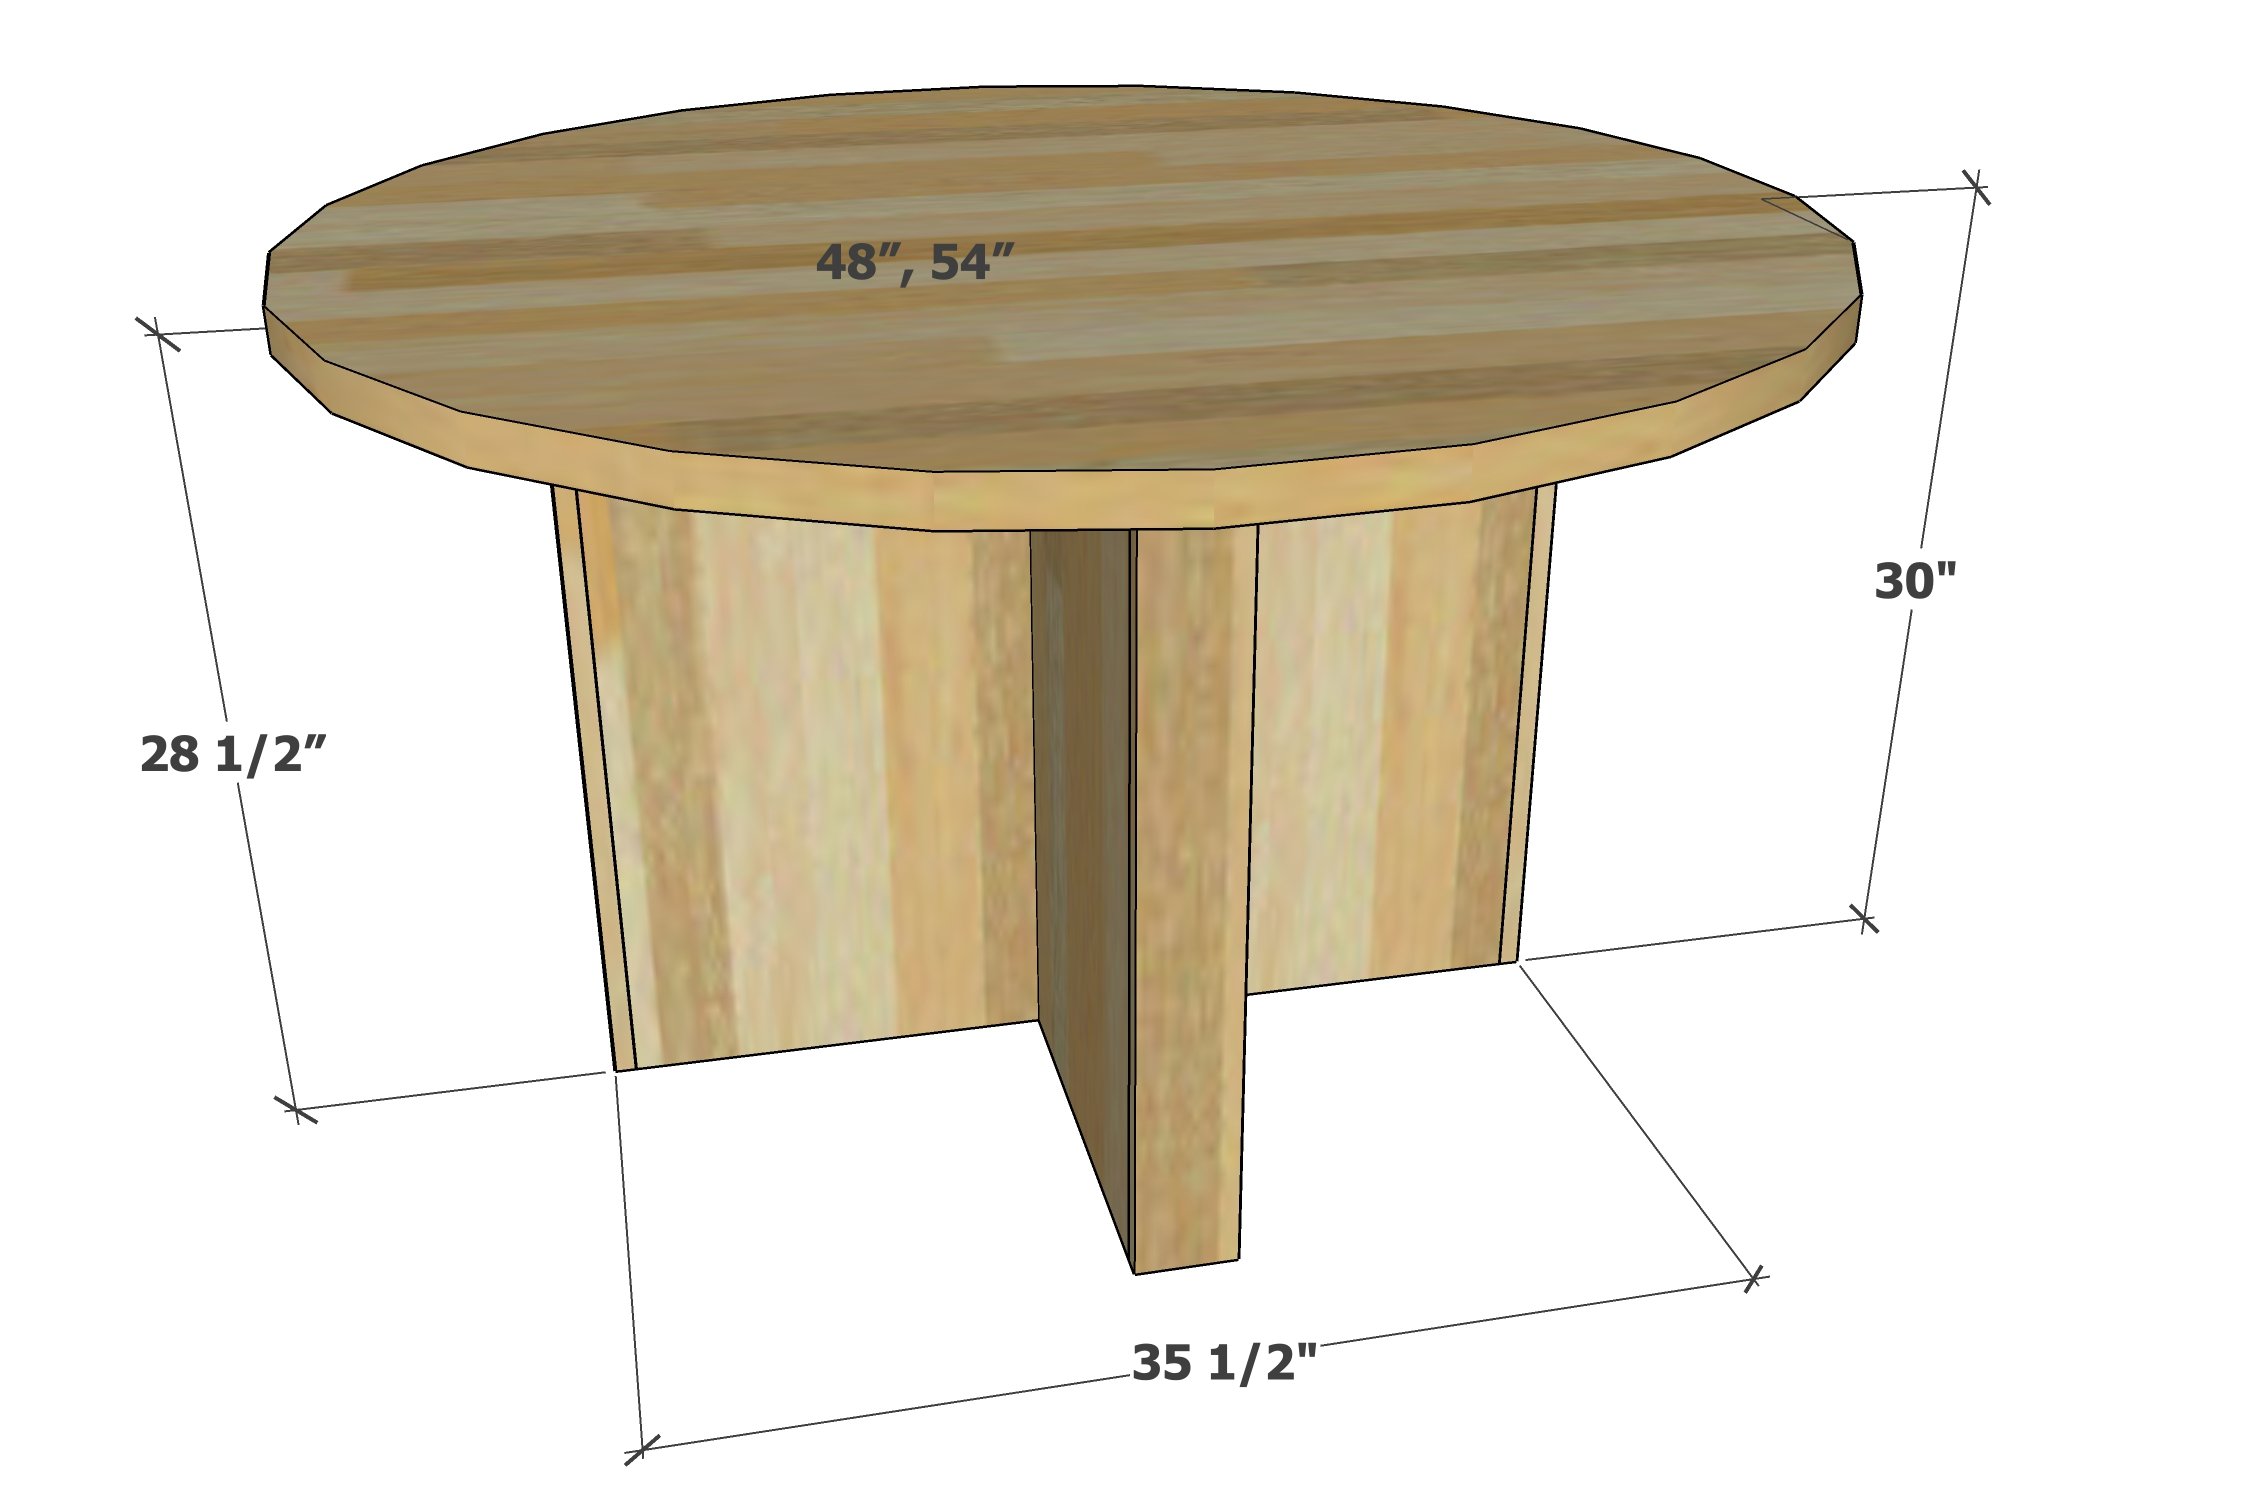 dimensions for modern round dining table top